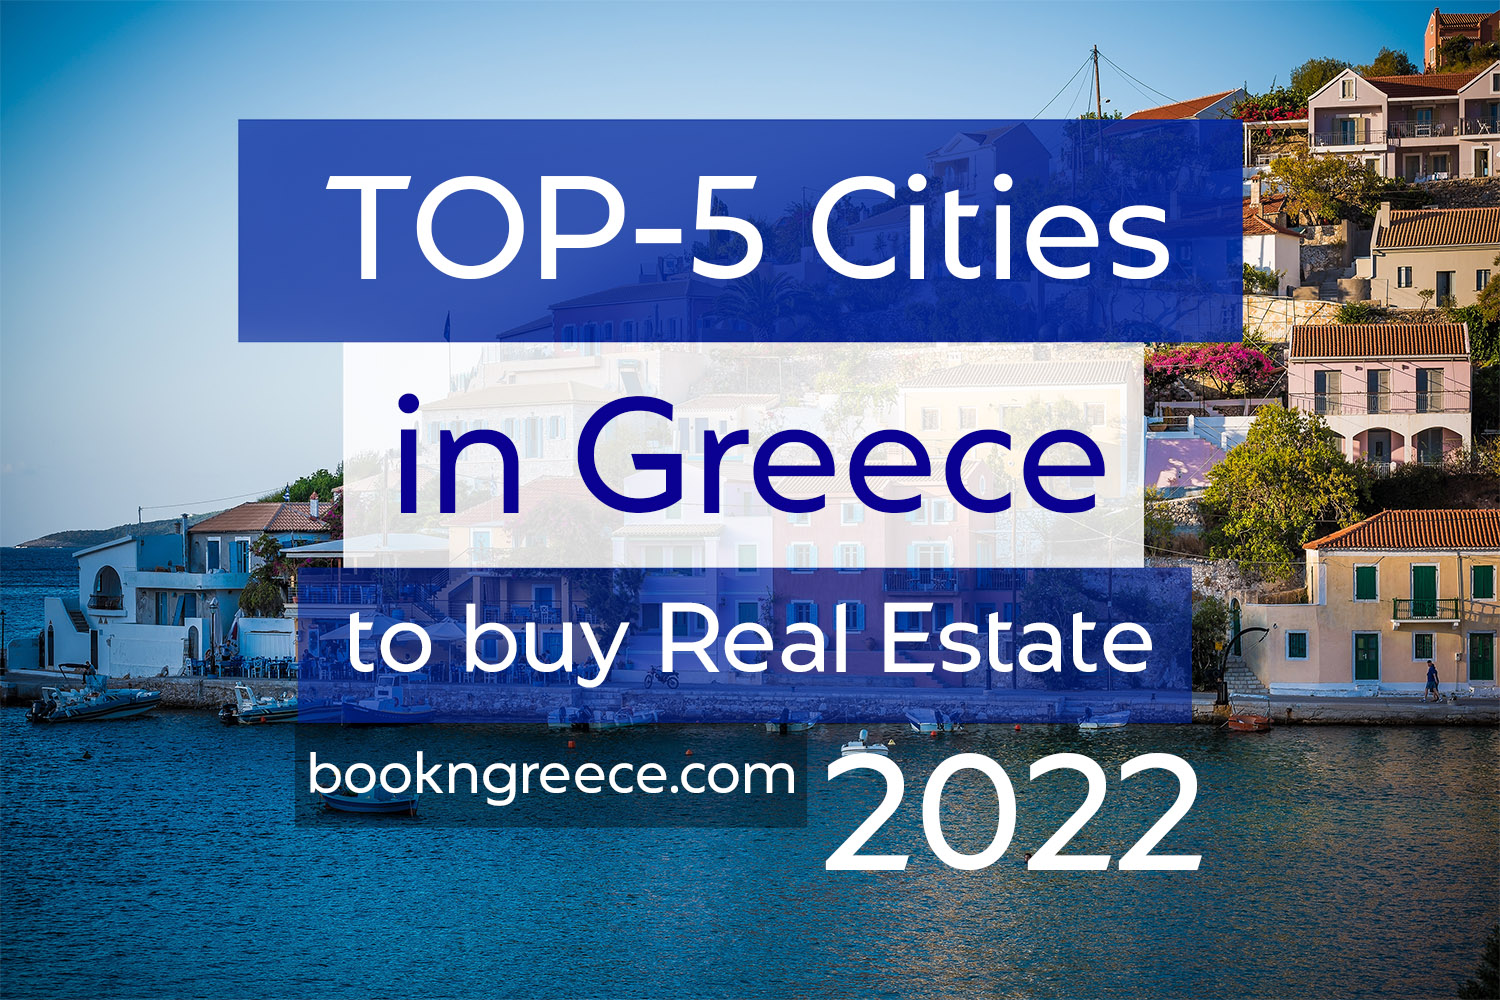 Where is the best place to invest in real estate in Greece?